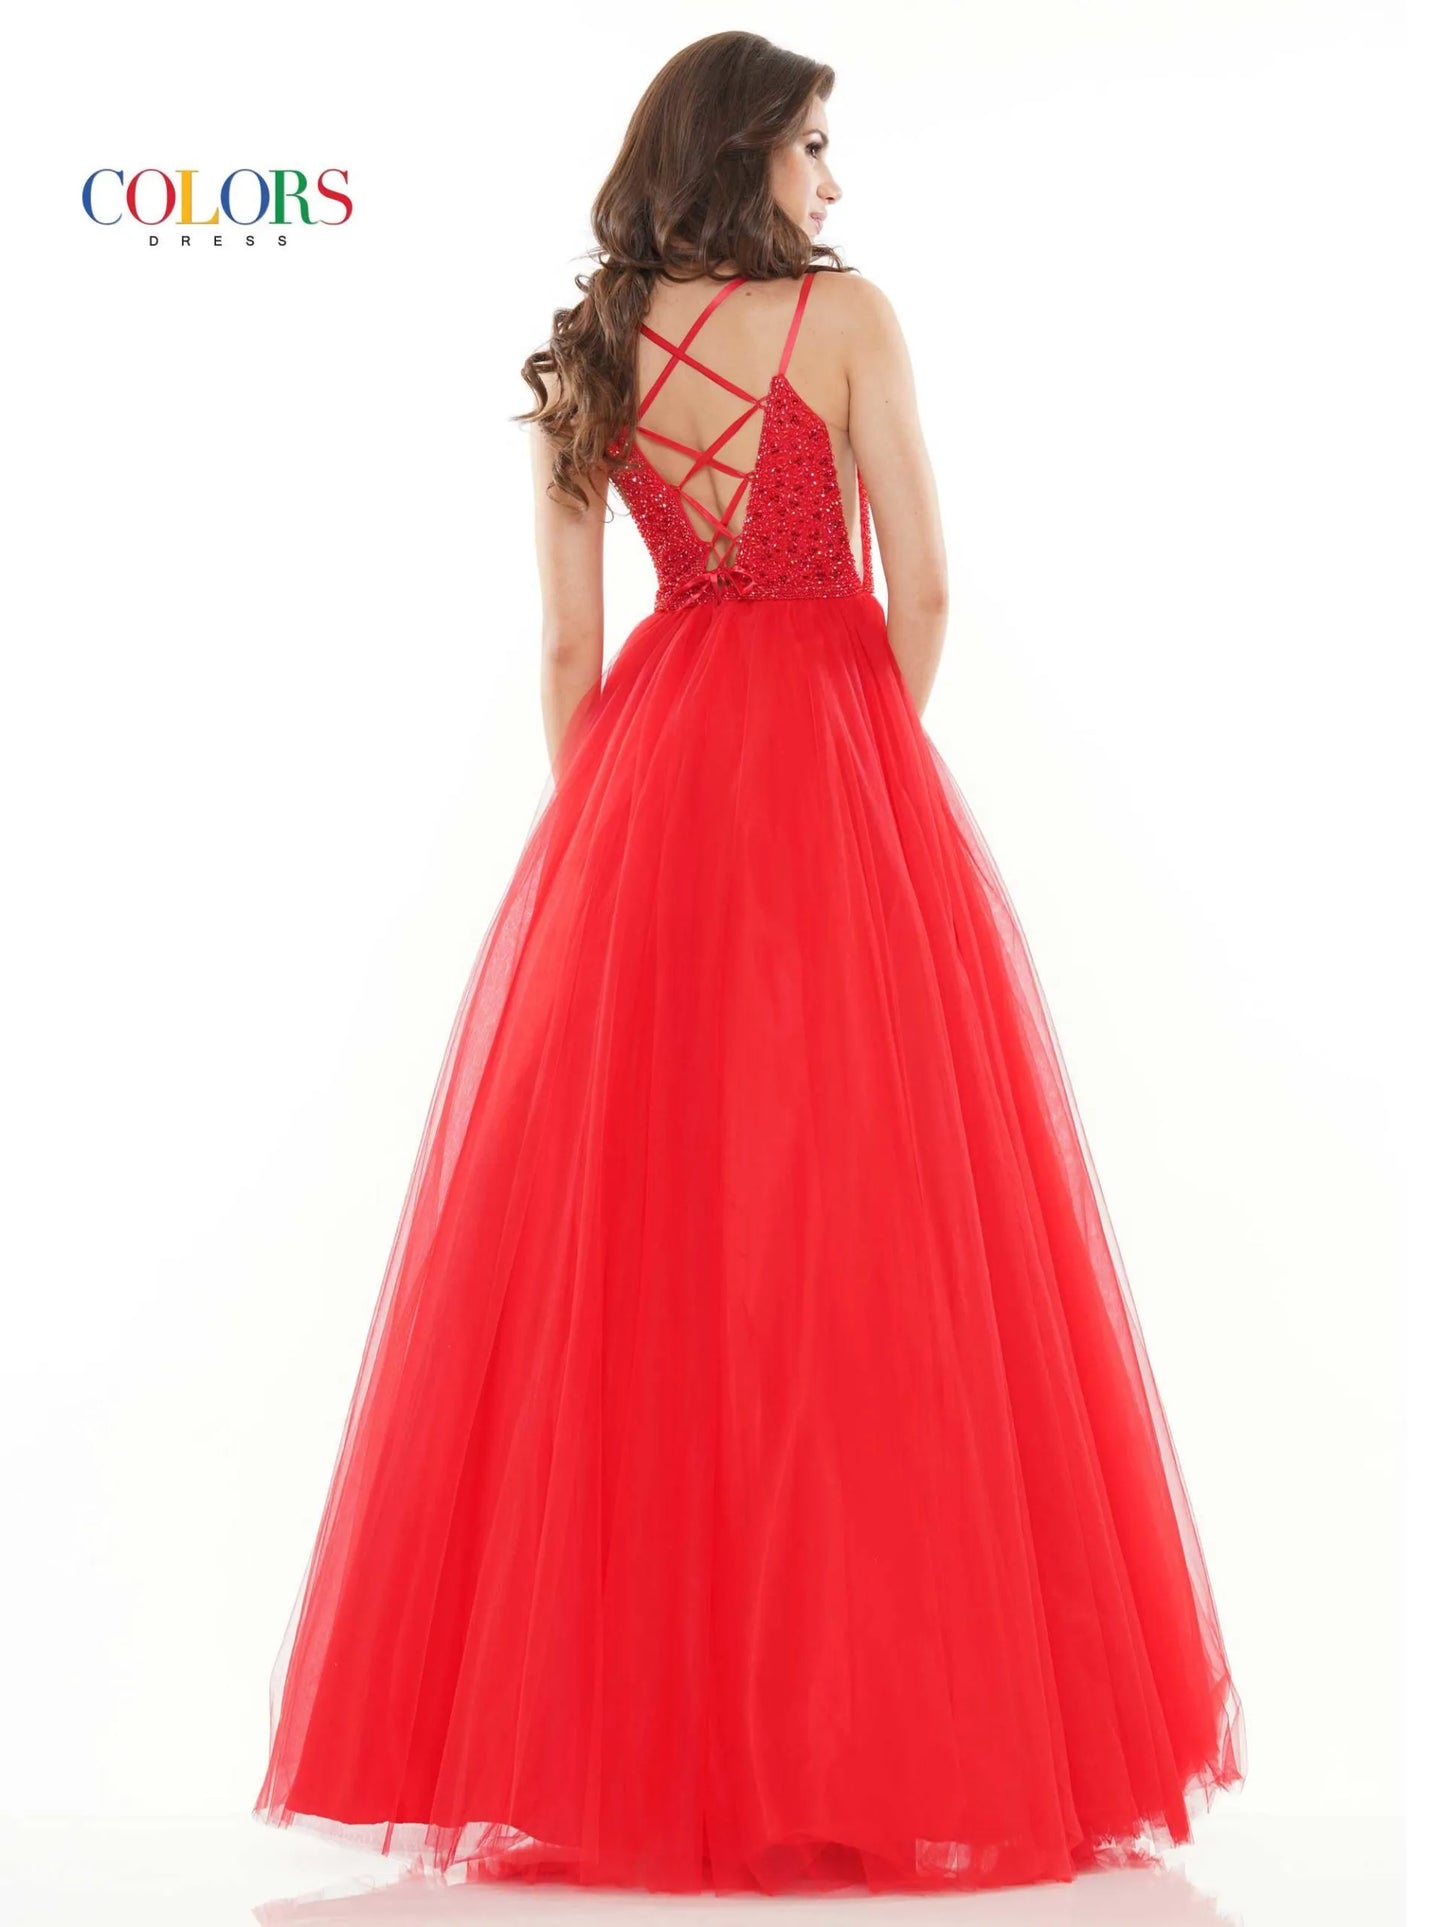 Make a statement in Colors 2382 Long Tulle Ballgown. Featuring a crystal V-neck, open corset back and formal ballgown skirt, this glamorous gown is the perfect choice for prom or any special night. 47" tulle gown with beaded bodice, sheer side panels, plunged V neck and lace up back detail  Sizes: 0-20   Colors: Black, Red, Emerald, Off White, Royal Purple